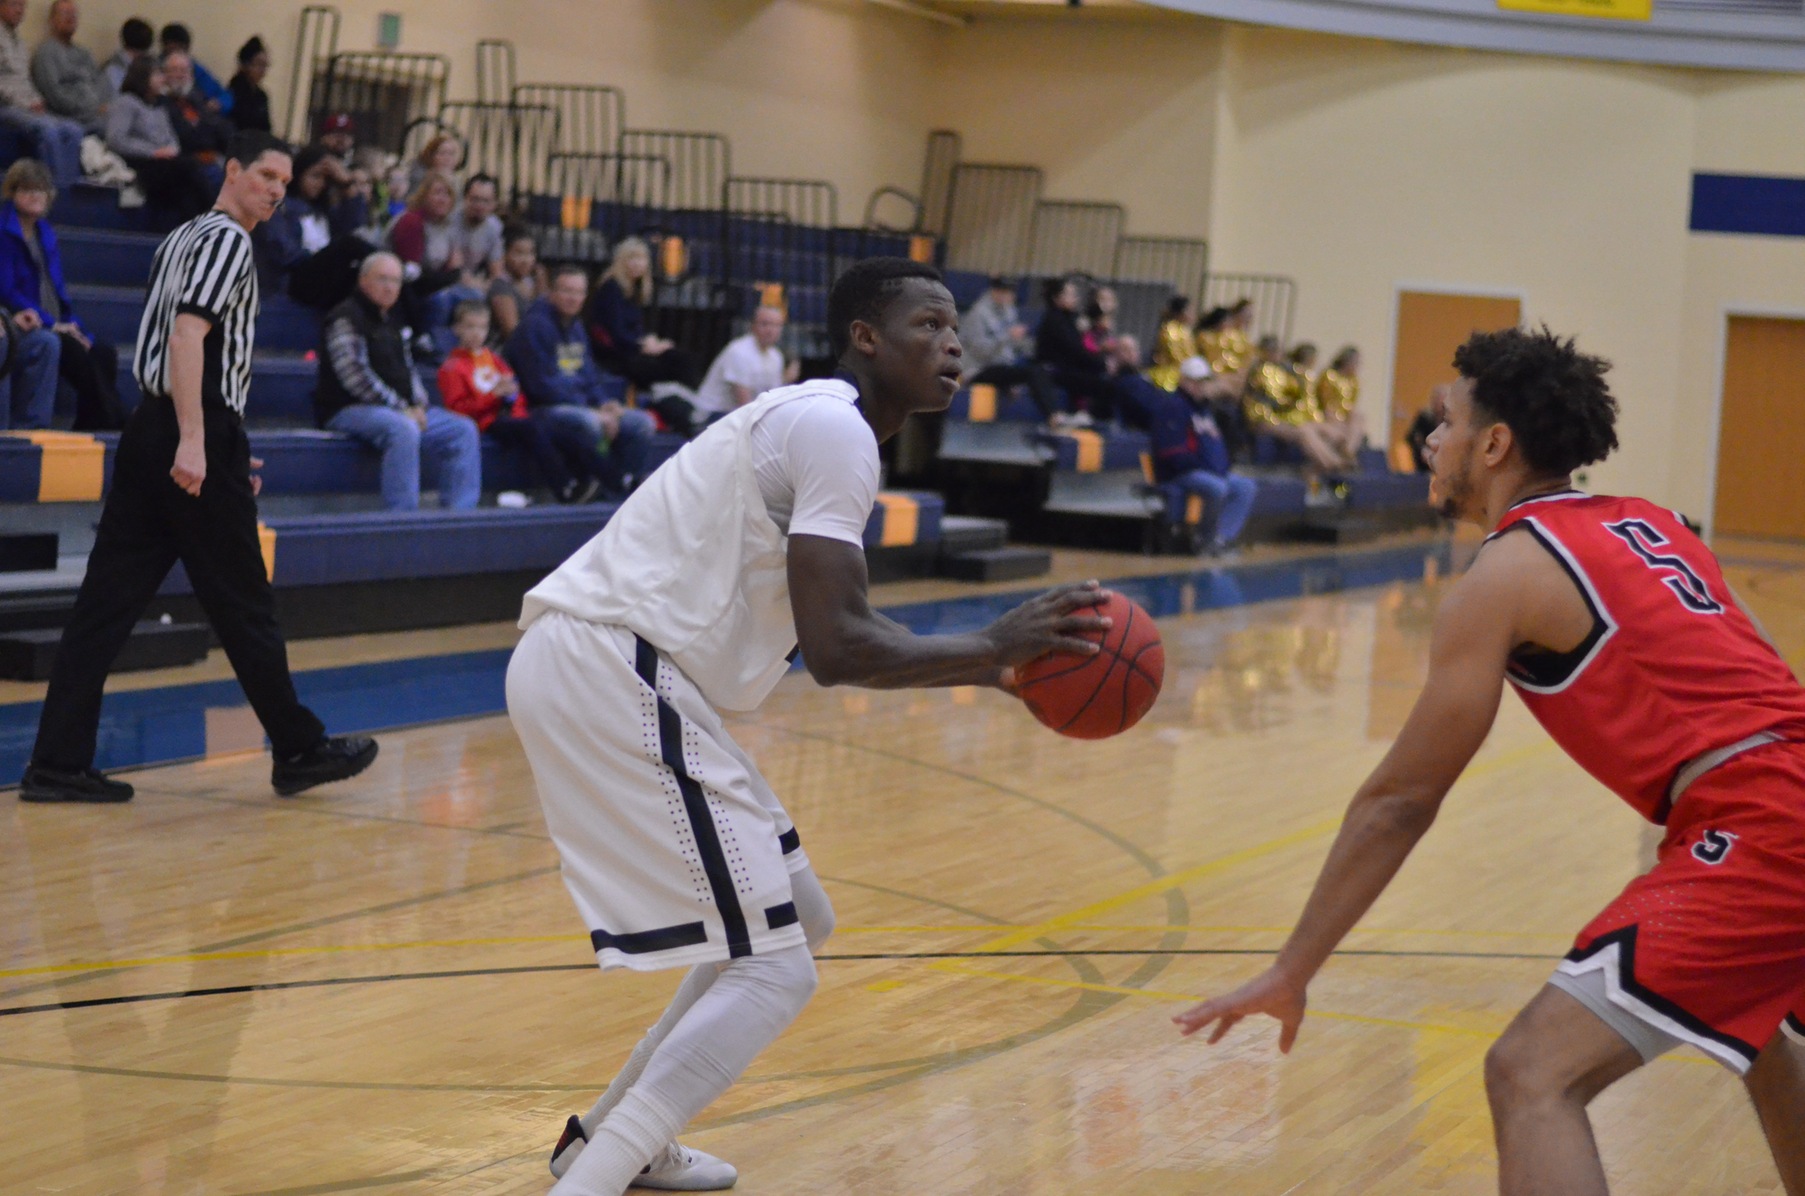 Mohamed Thiam collected his 13th double-double of the year to lead MCC past Southeastern on Wednesday night